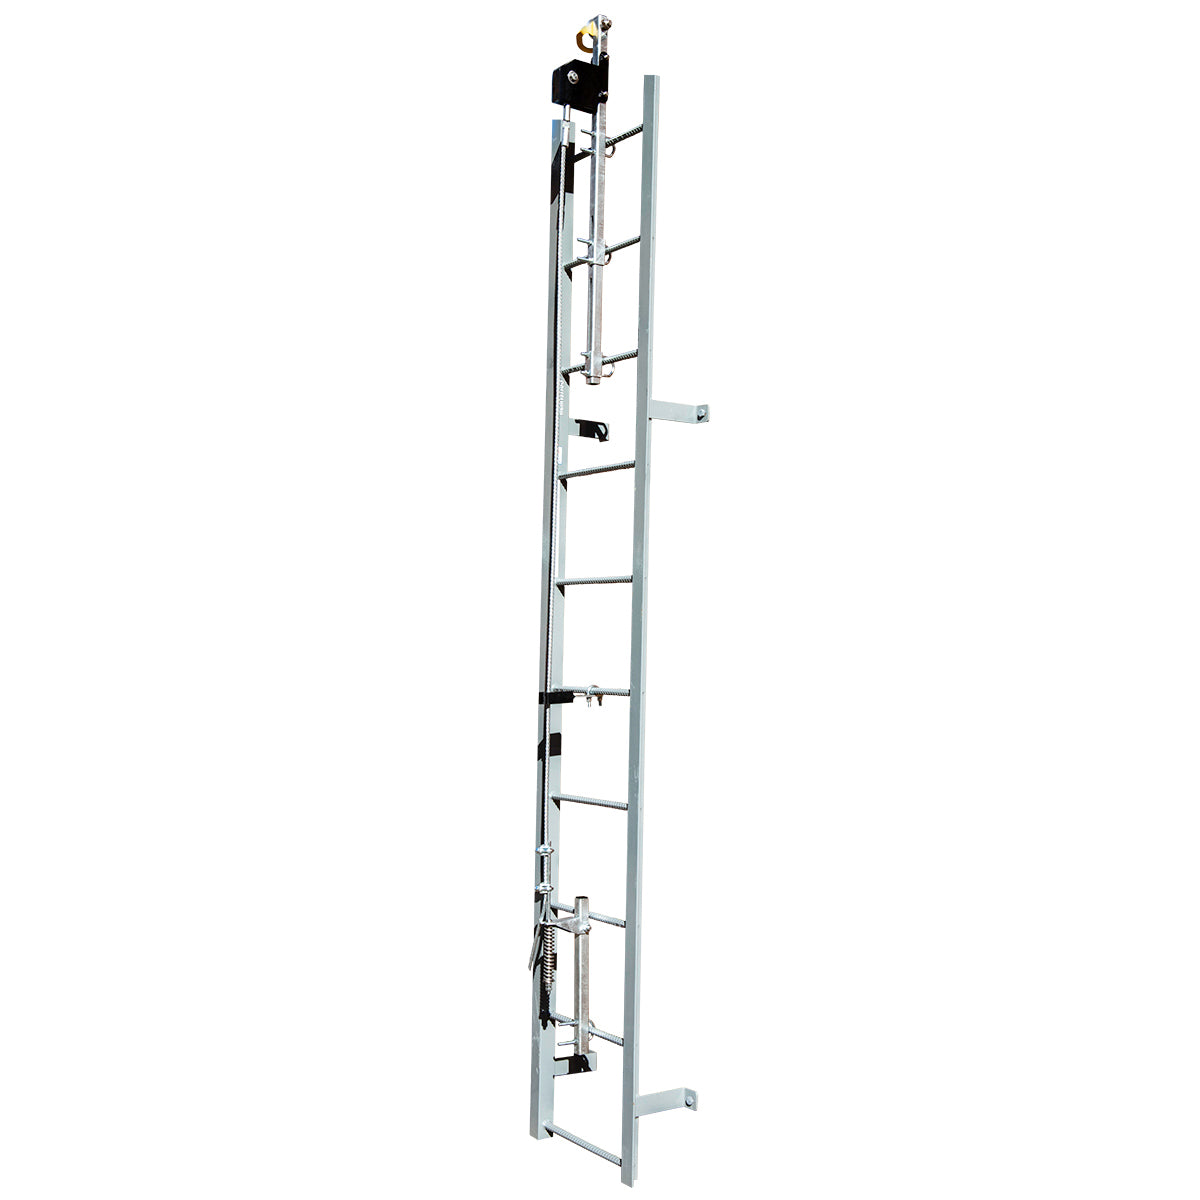 30' Ladder Climb System, 4-Person Complete Kit